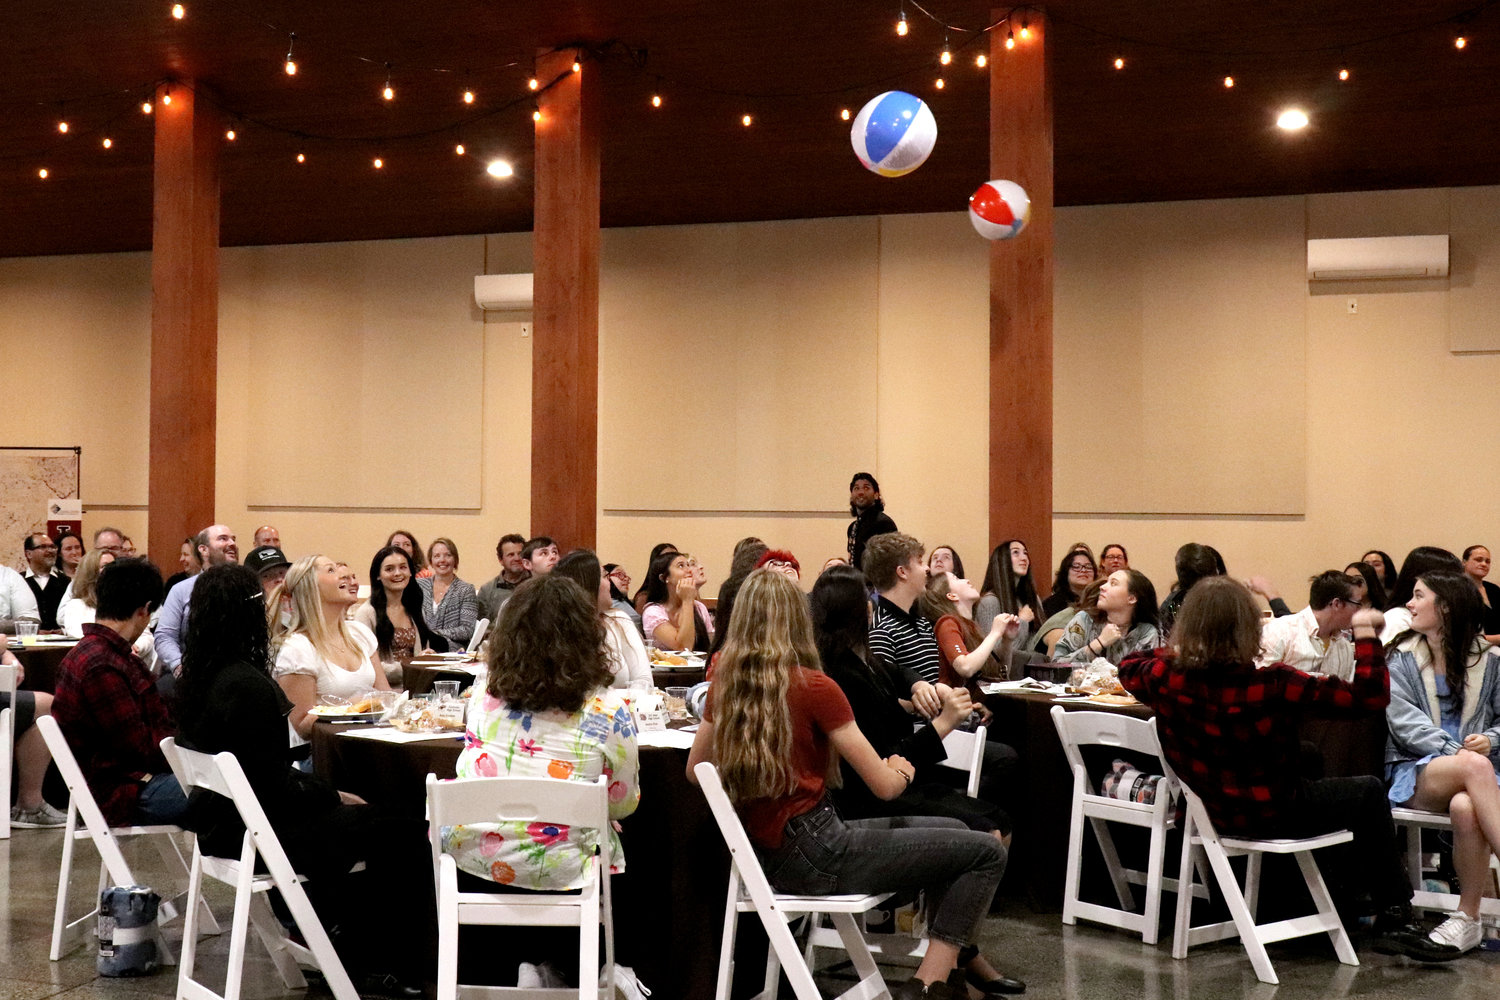 Beach balls descend towards graduating seniors and their families during the Rob Fuller Top 25 Scholarship Luncheon in Chehalis on Monday.